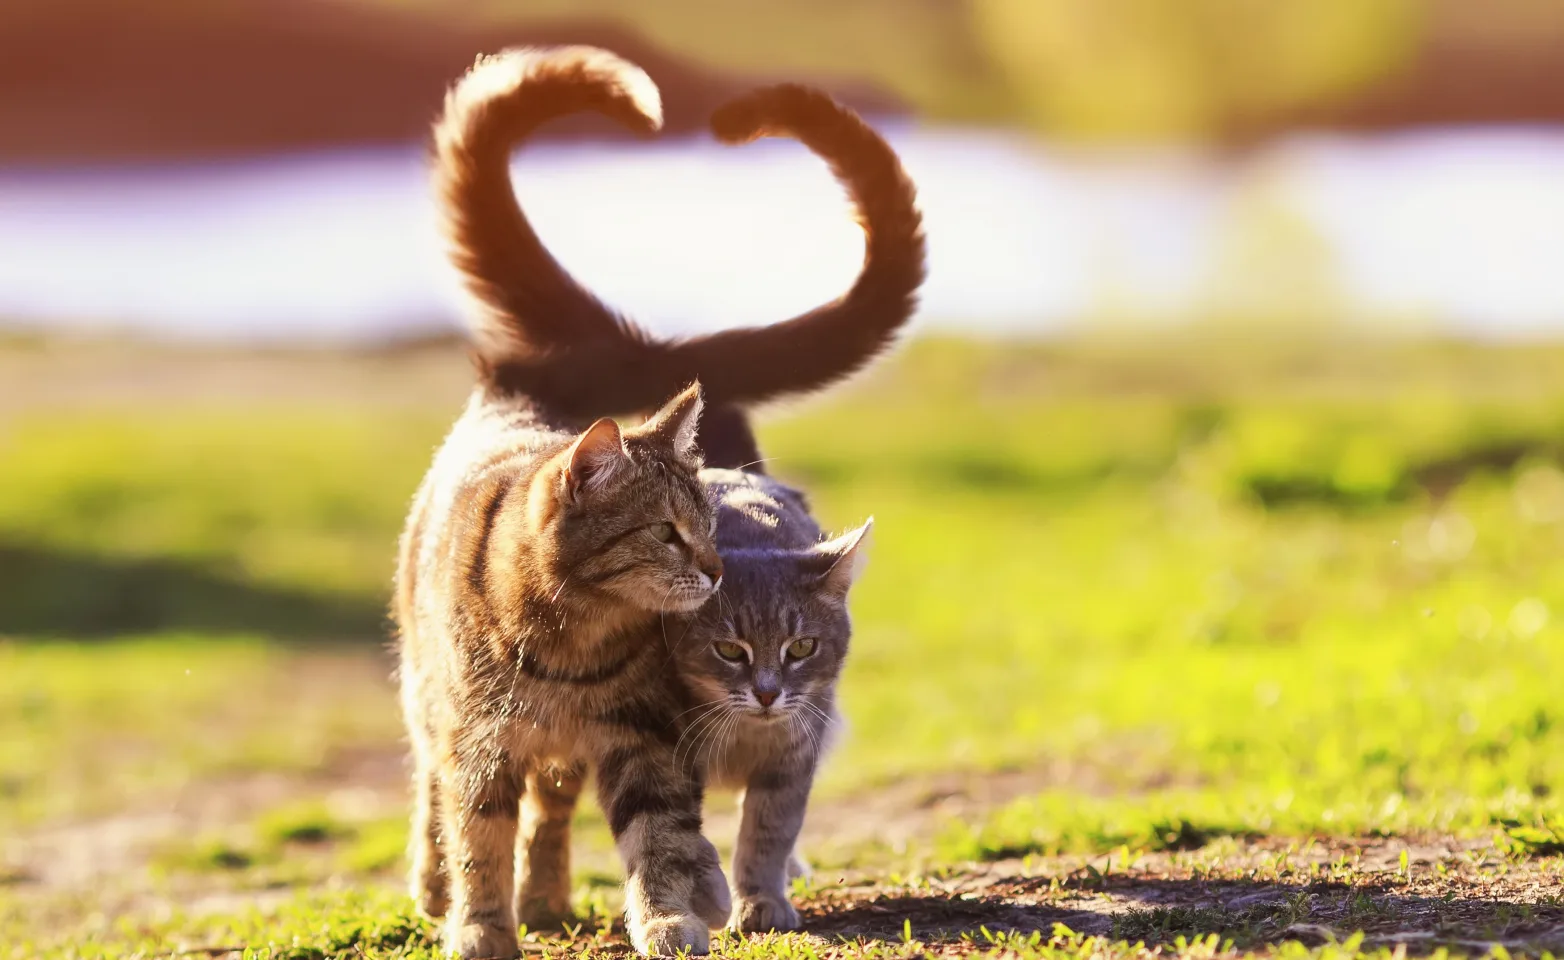 two cats walking together and tails form a heart-like shape